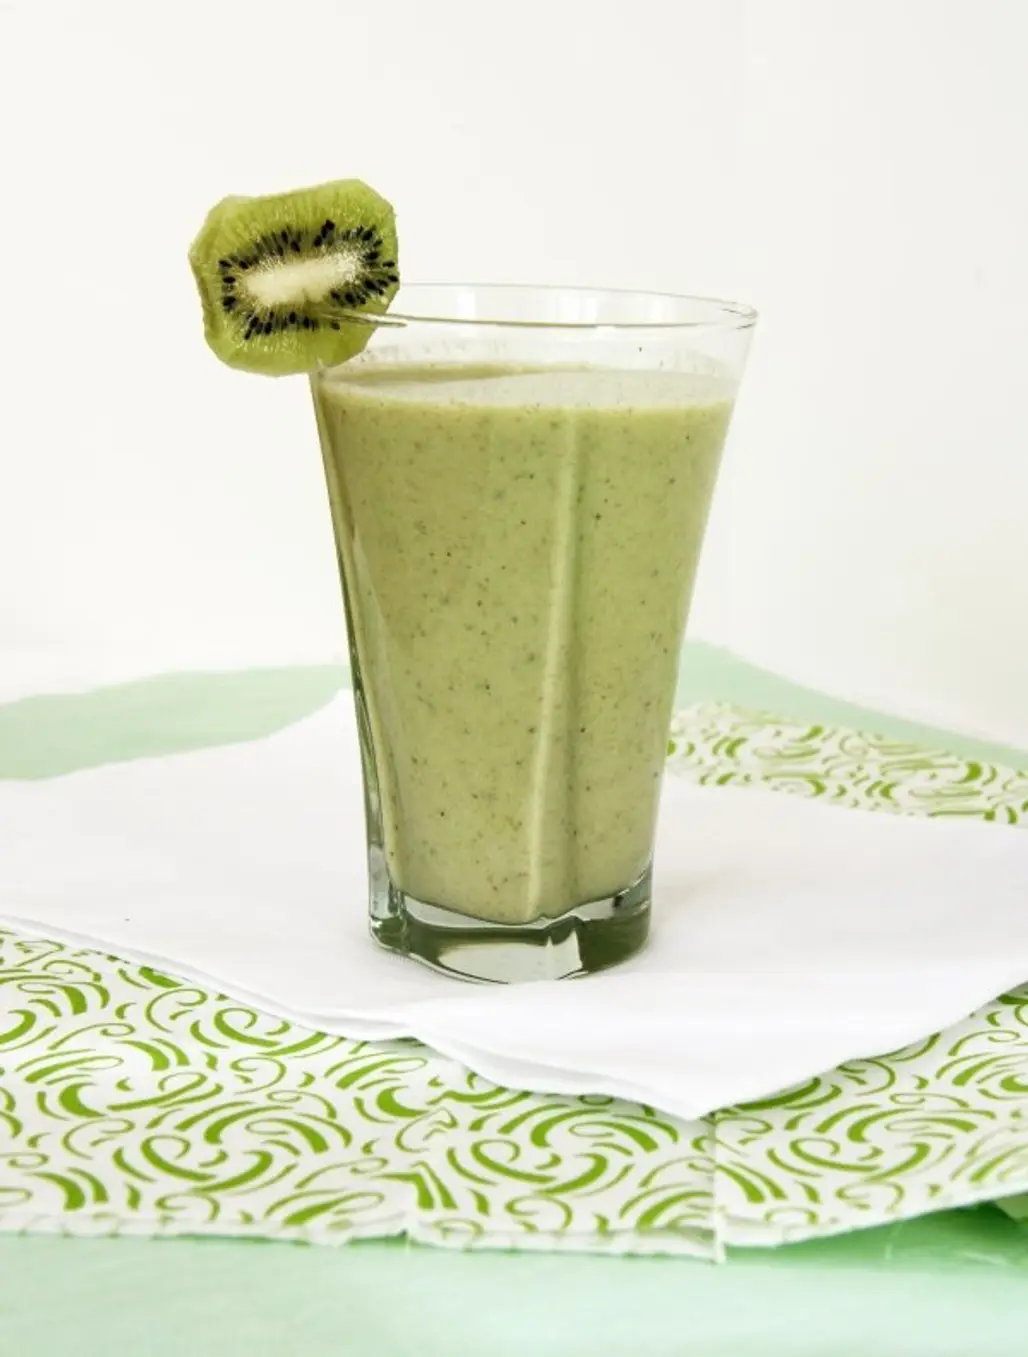 Have a Green Shake